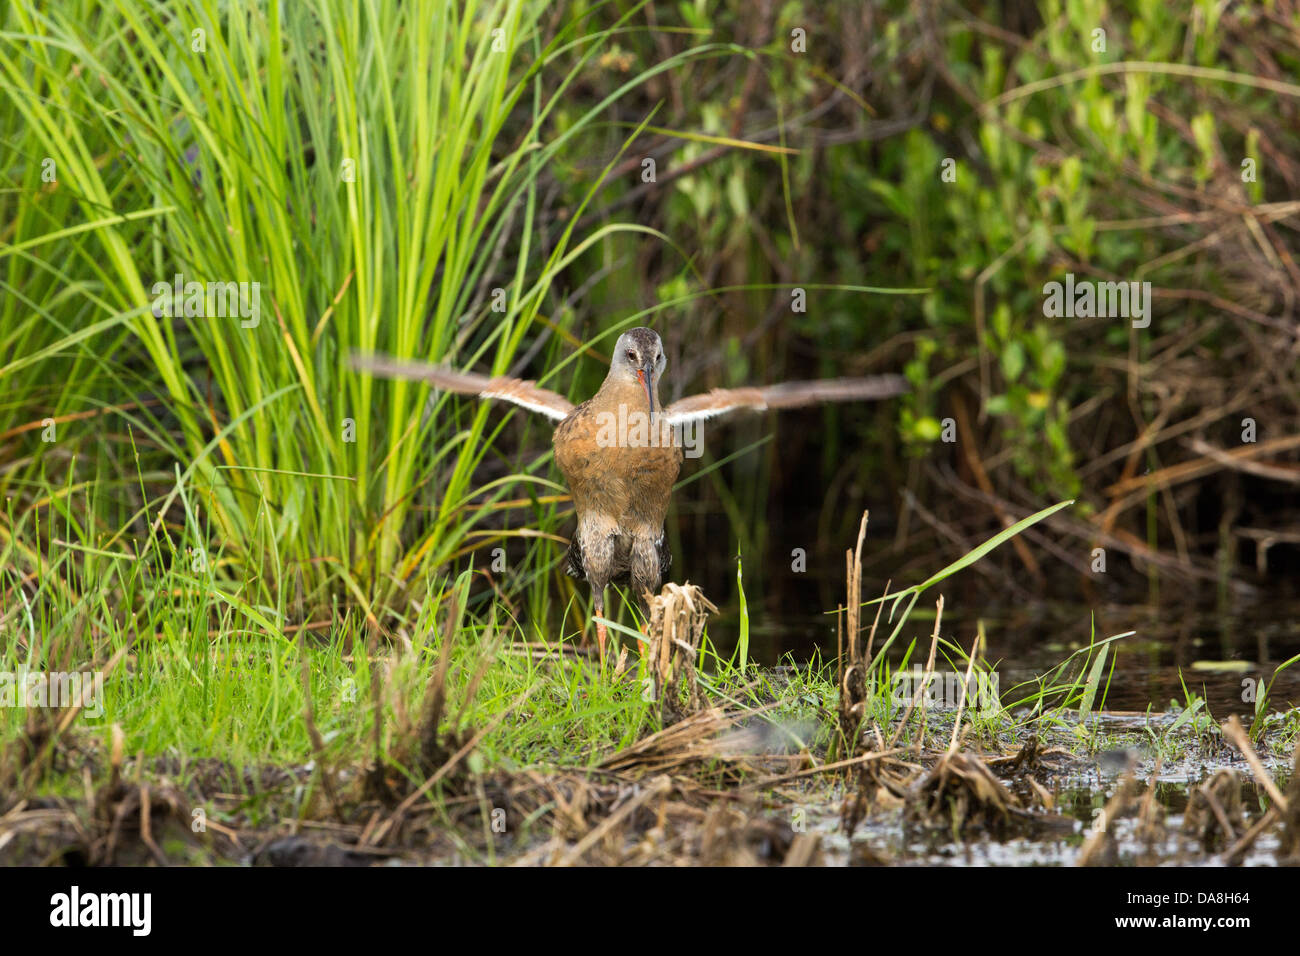 Virginia rail flapping wings Stock Photo